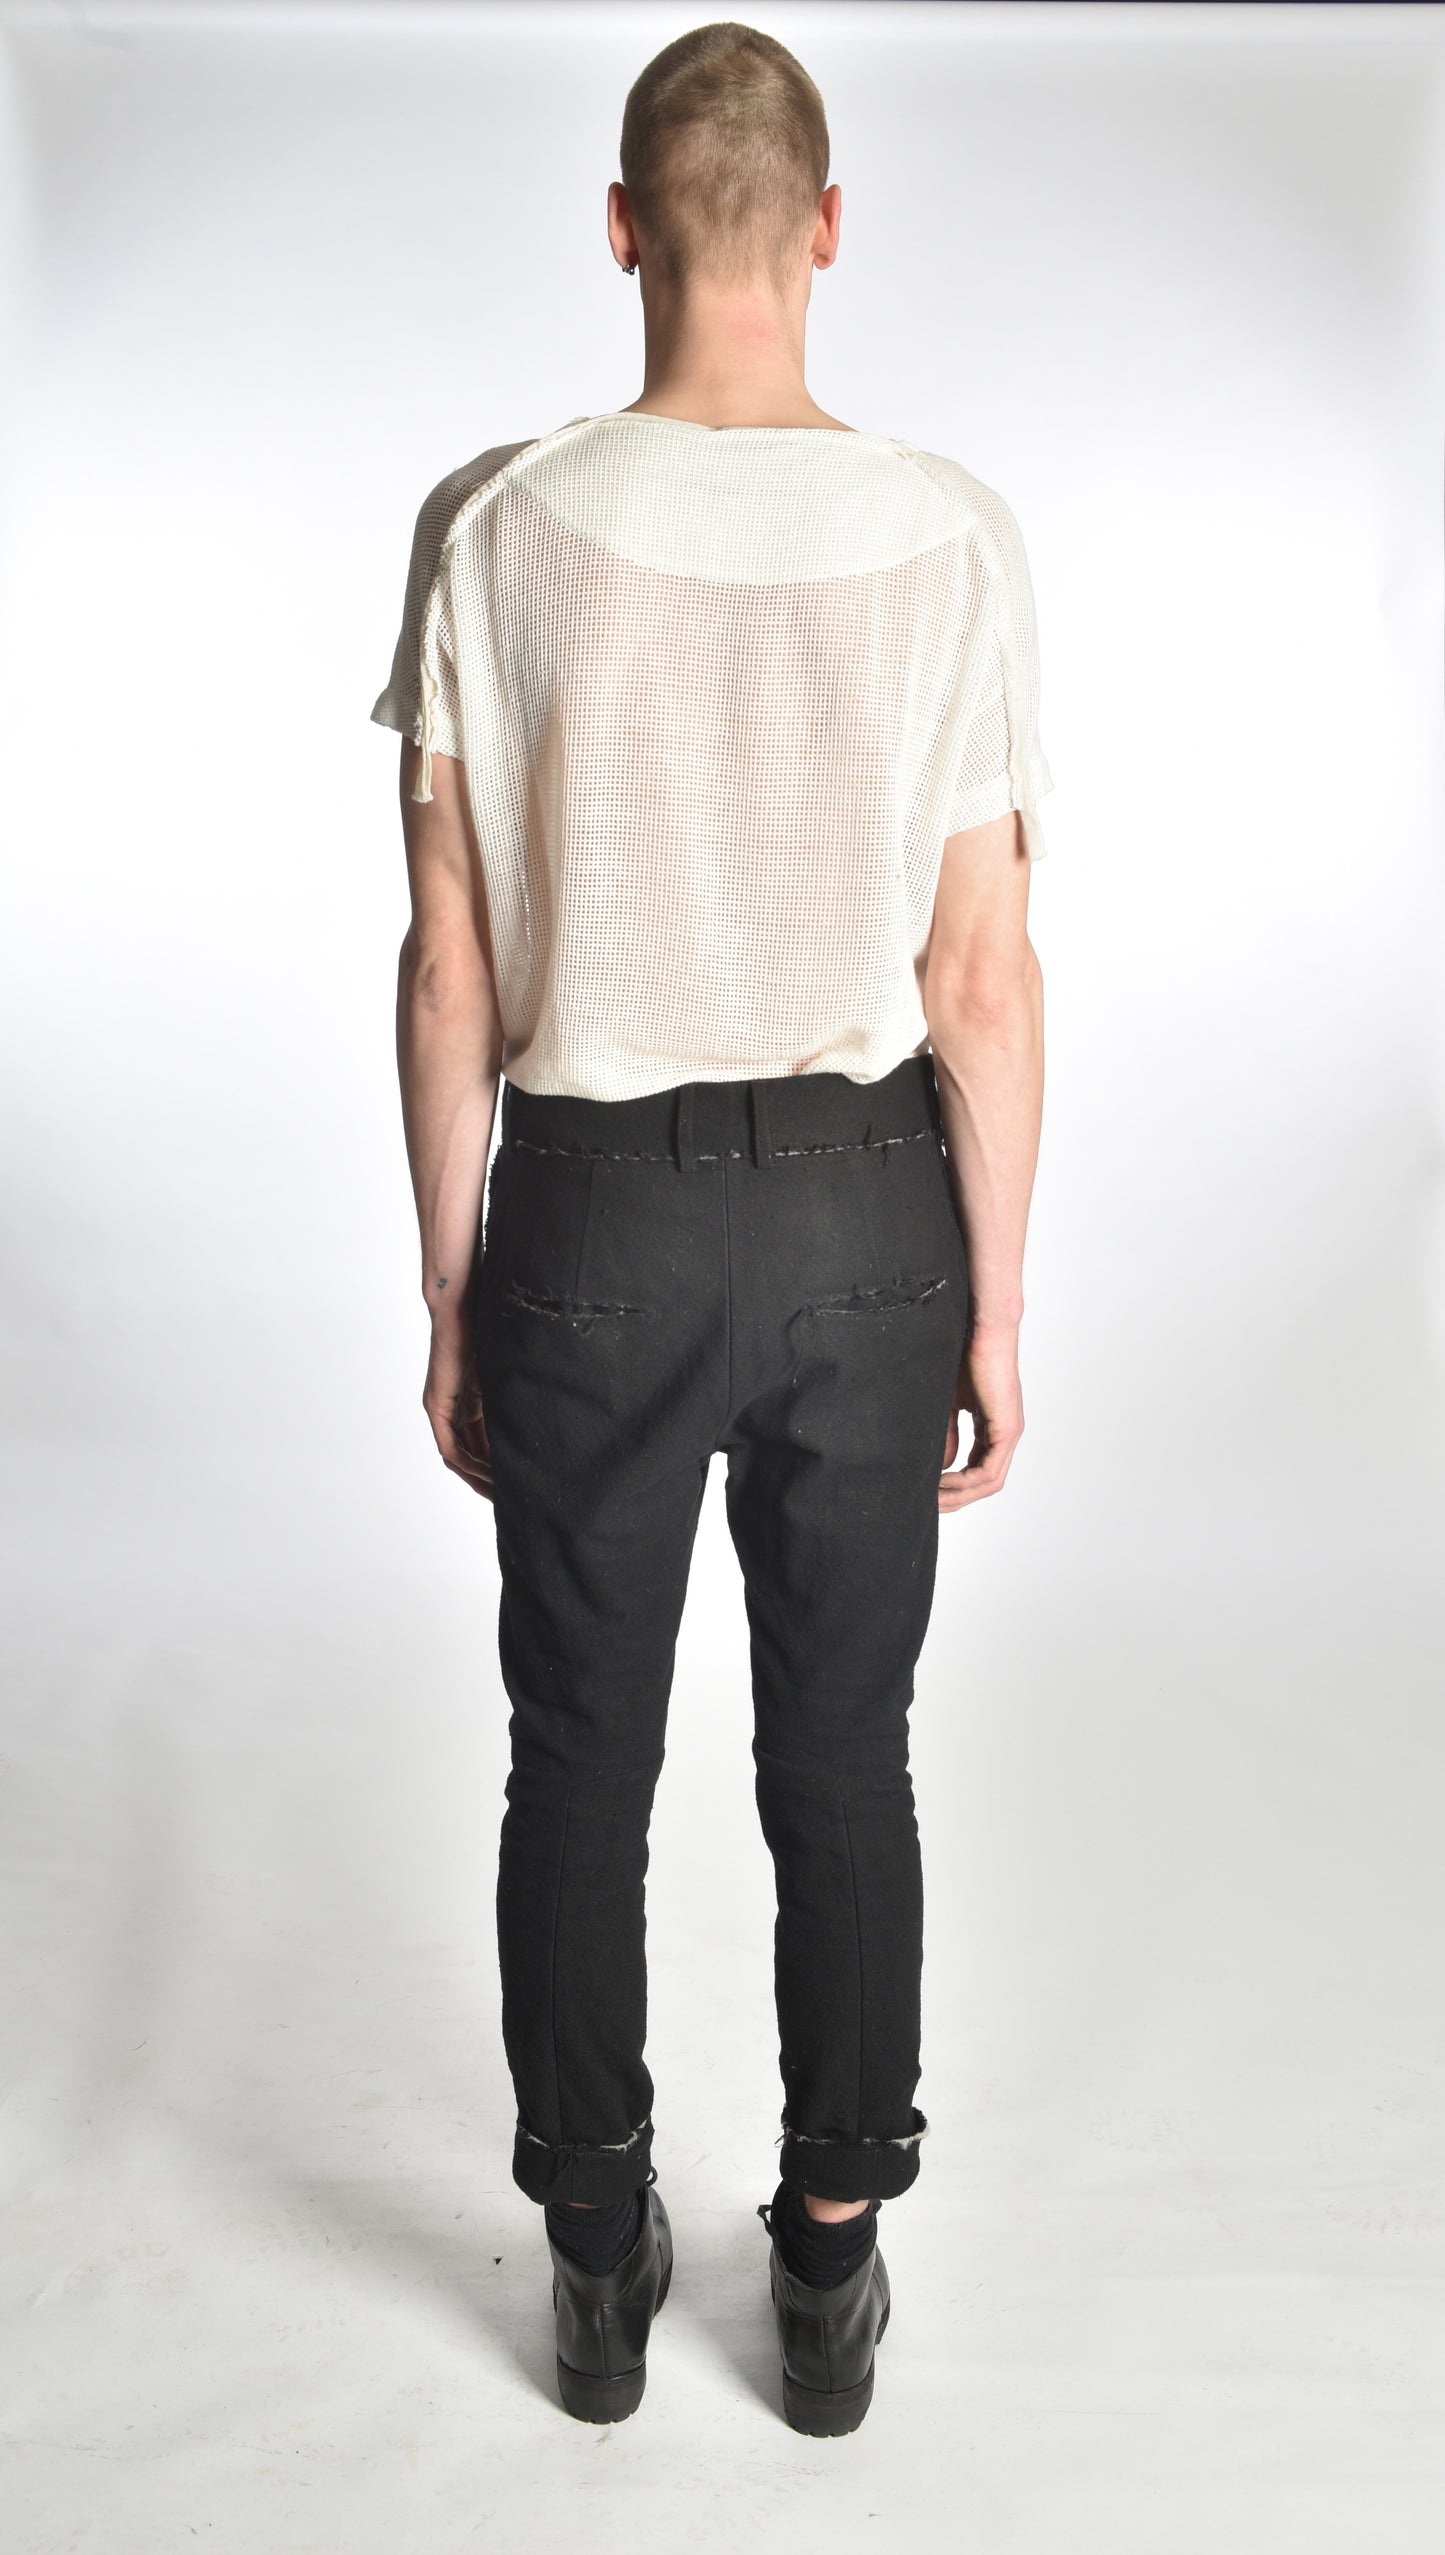 TR47 - Padded Deconstructed Pants